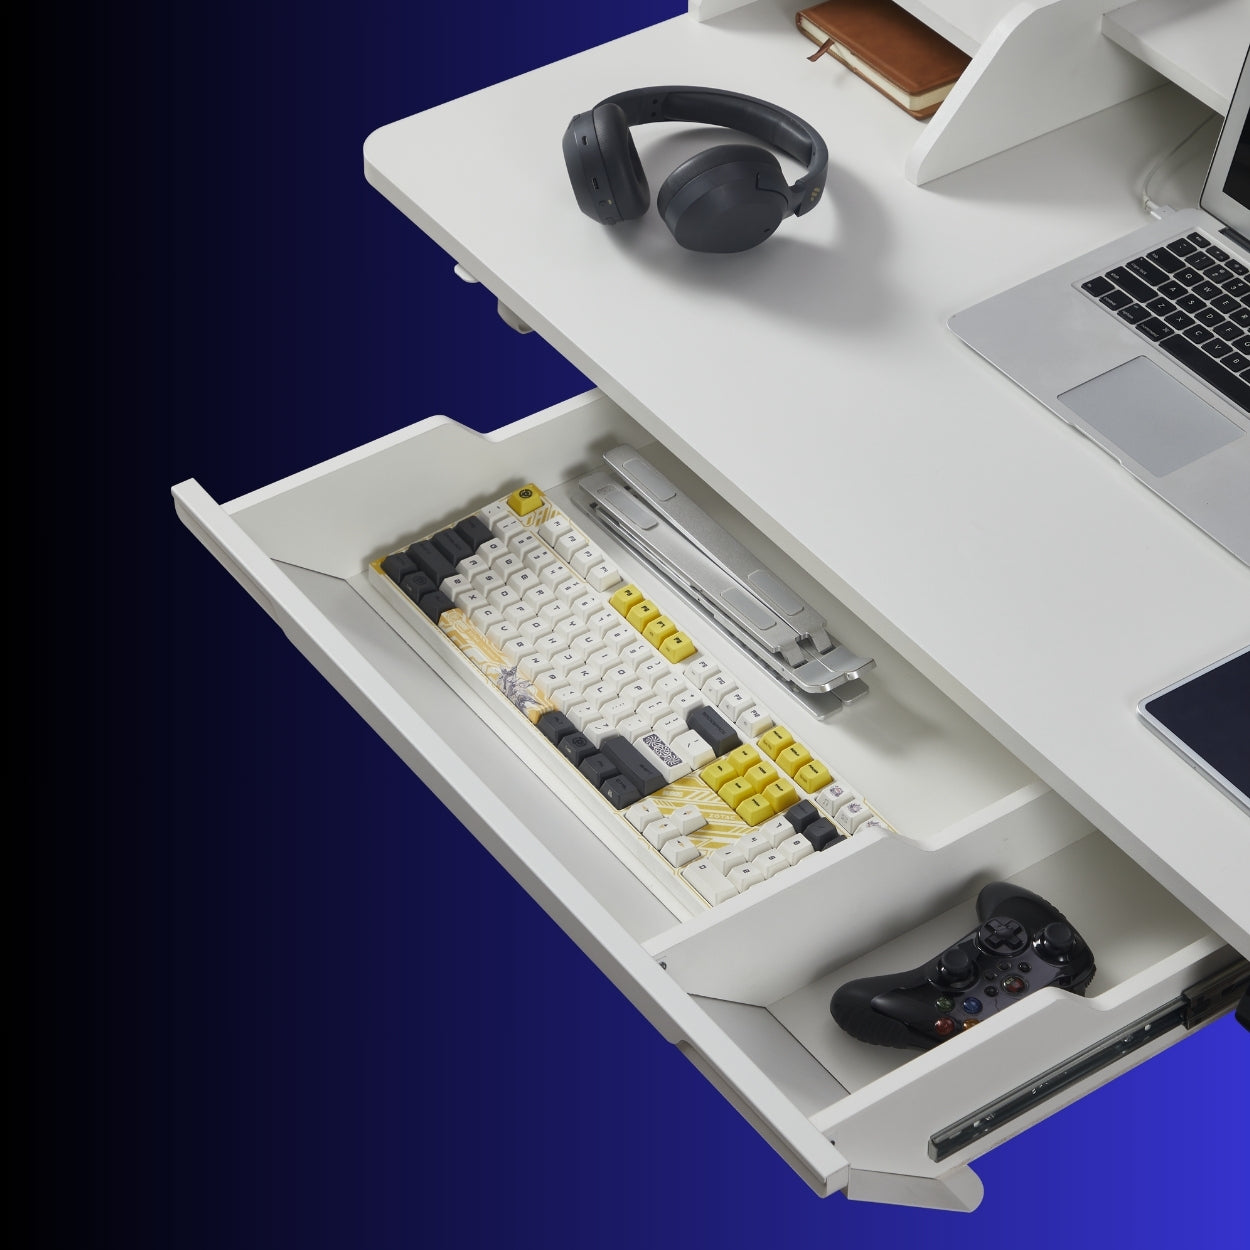 The desk accessory set includes a large drawer provides plenty of storage space for desk accessory, such as keyboard and mouse